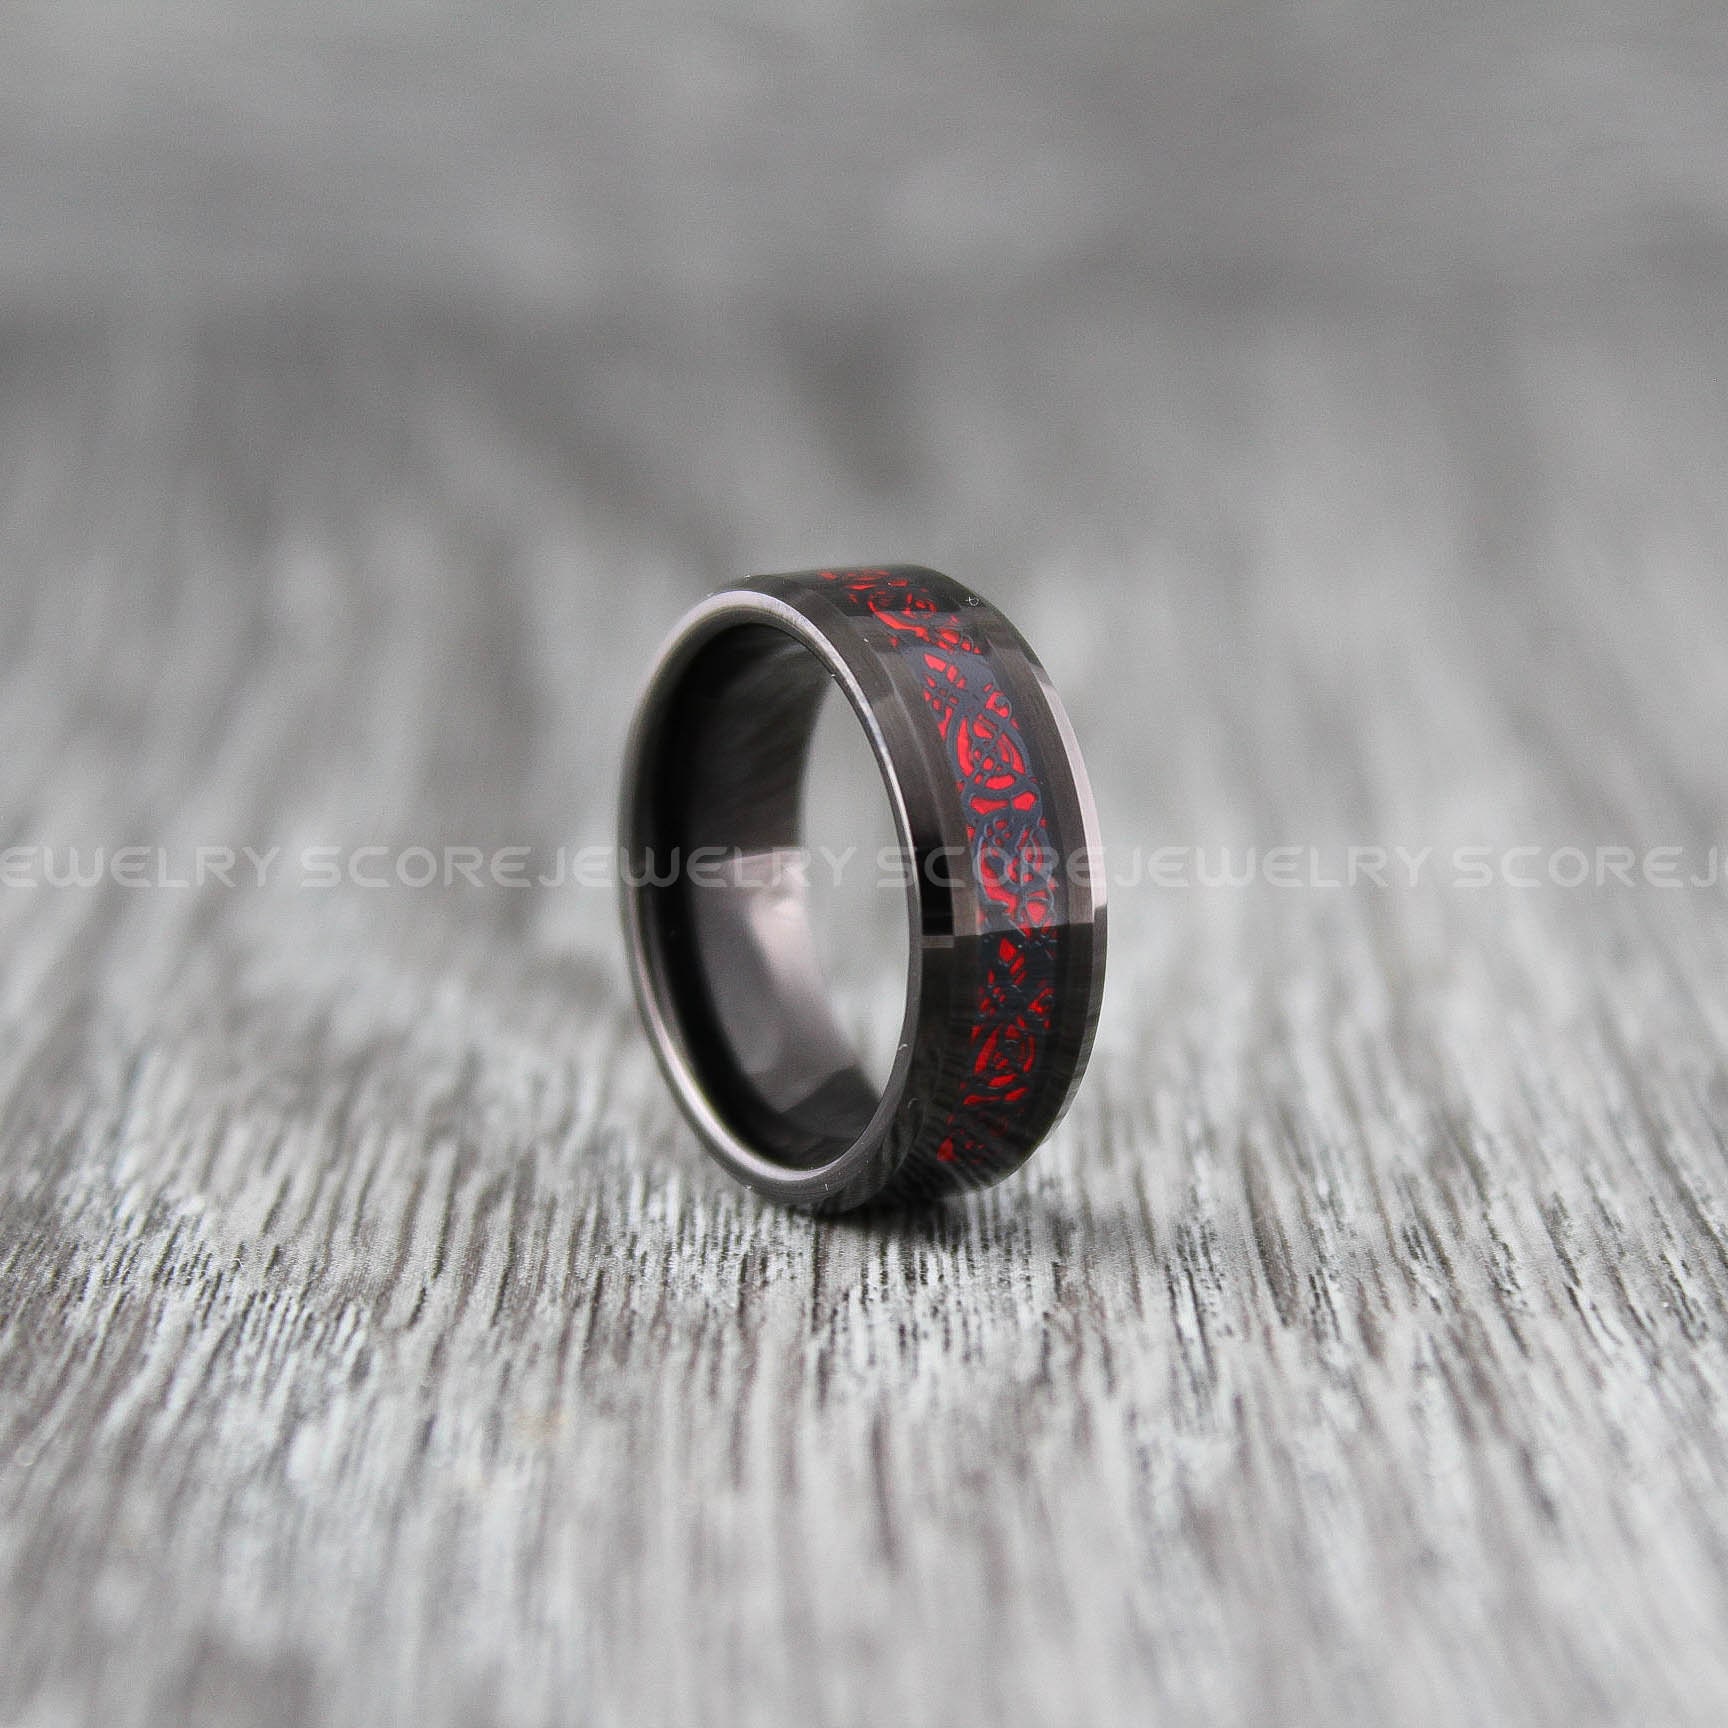 Black Wedding Ring 8mm Black Tungsten Band With Red Center - Etsy